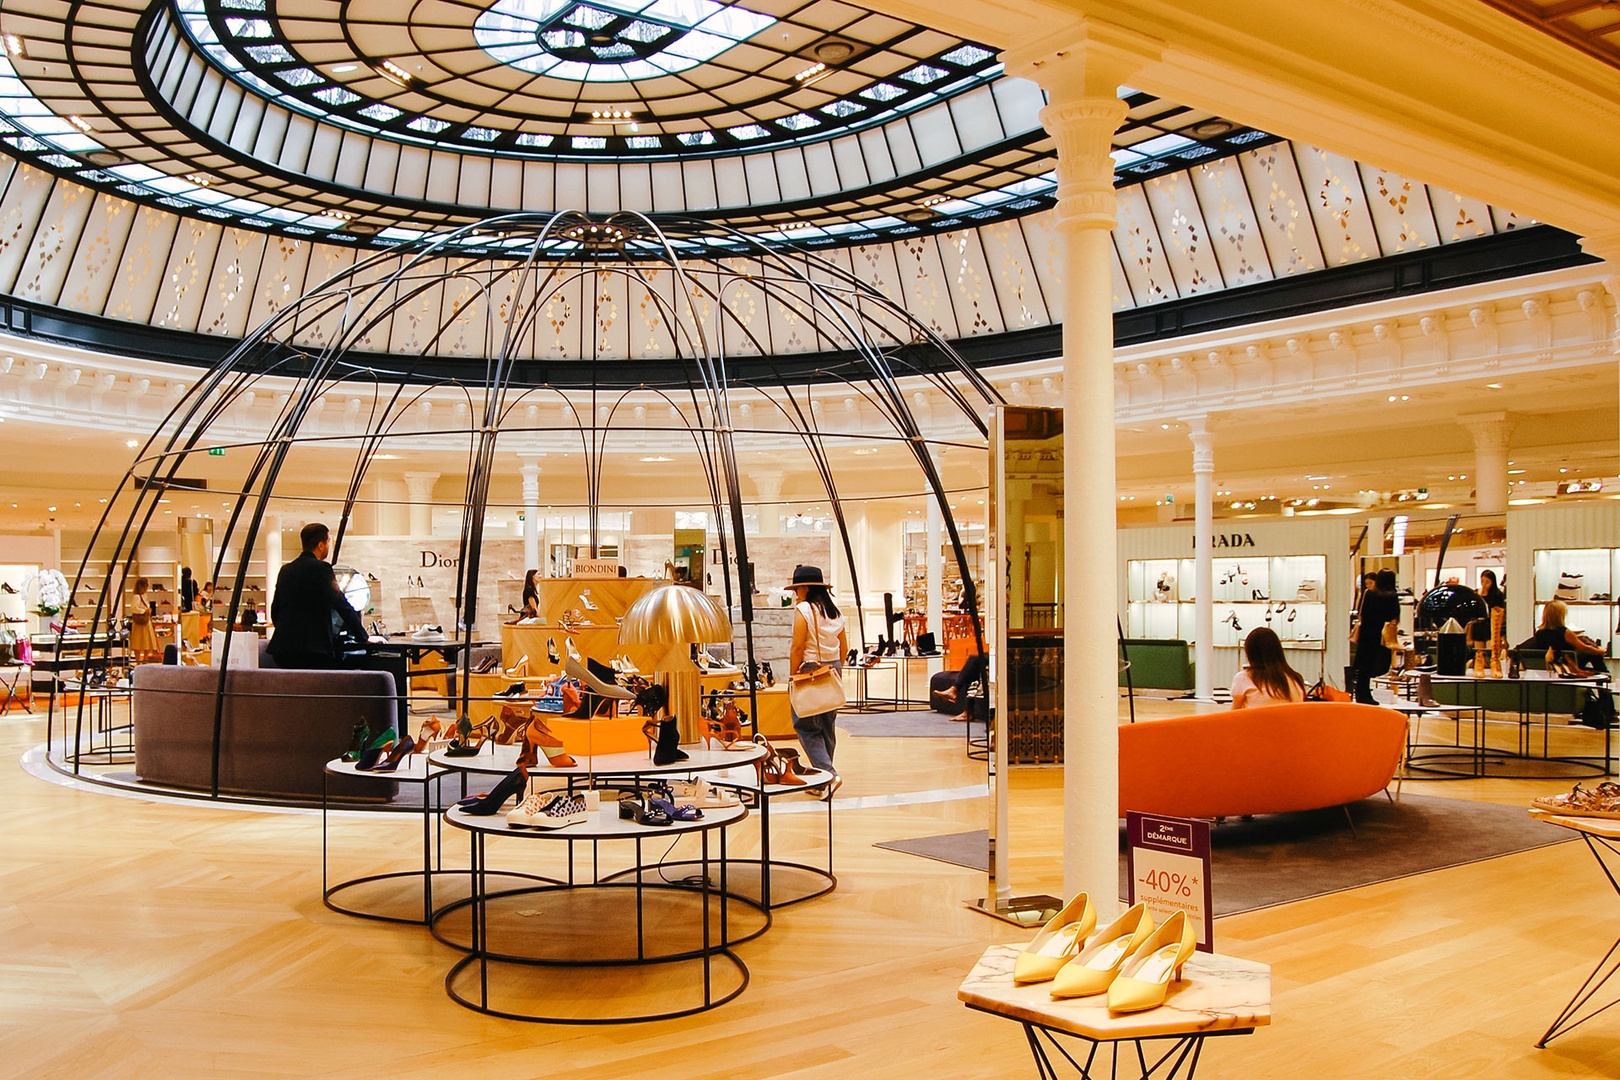 Shop with style in the stunning Le Bon Marché.